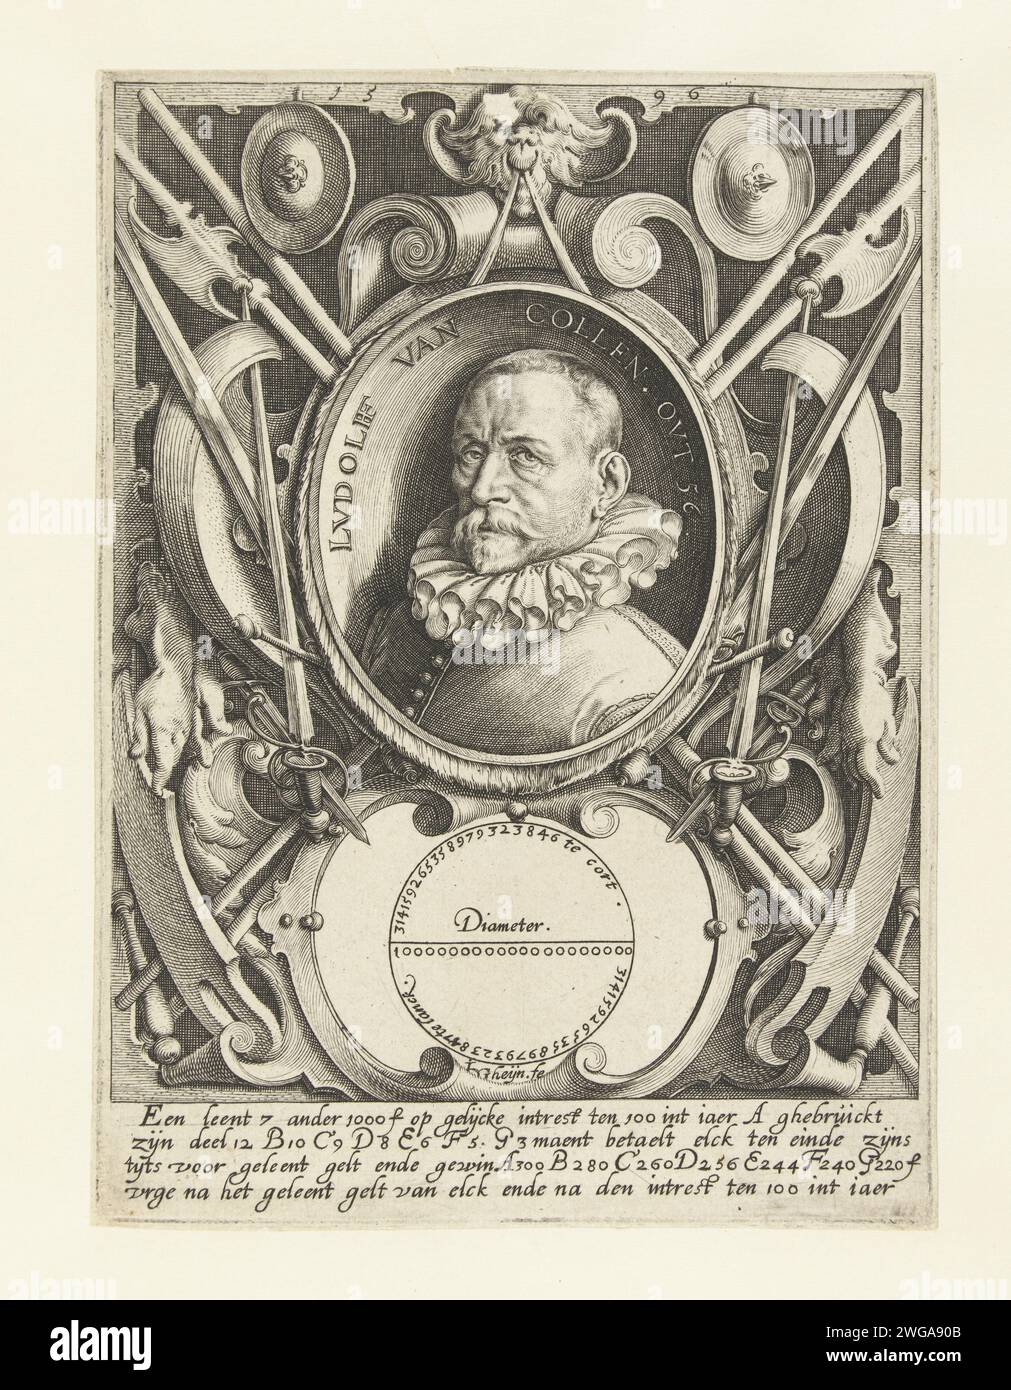 Portrait of Ludolf van Ceulen at the age of 56, 1596 print Buste van Ludolf van Ceulen (Hildesheim, January 28, 1540 - Leiden, 31 December 1610) at the age of 56, with loose -pleated collar, in oval with edge, contained in ornament list with rolling and weapons. Under the portrait an image of a circle with a description of the number pi. A four -line Dutch caption under the show. Van Ceulen was Schermer and Mathematicus. He became (according to Meursius in 1599, according to the resolutions of curators on January 10, 1600) on the recommendation of Prince Maurits together with Simon Fransz. Van Stock Photo